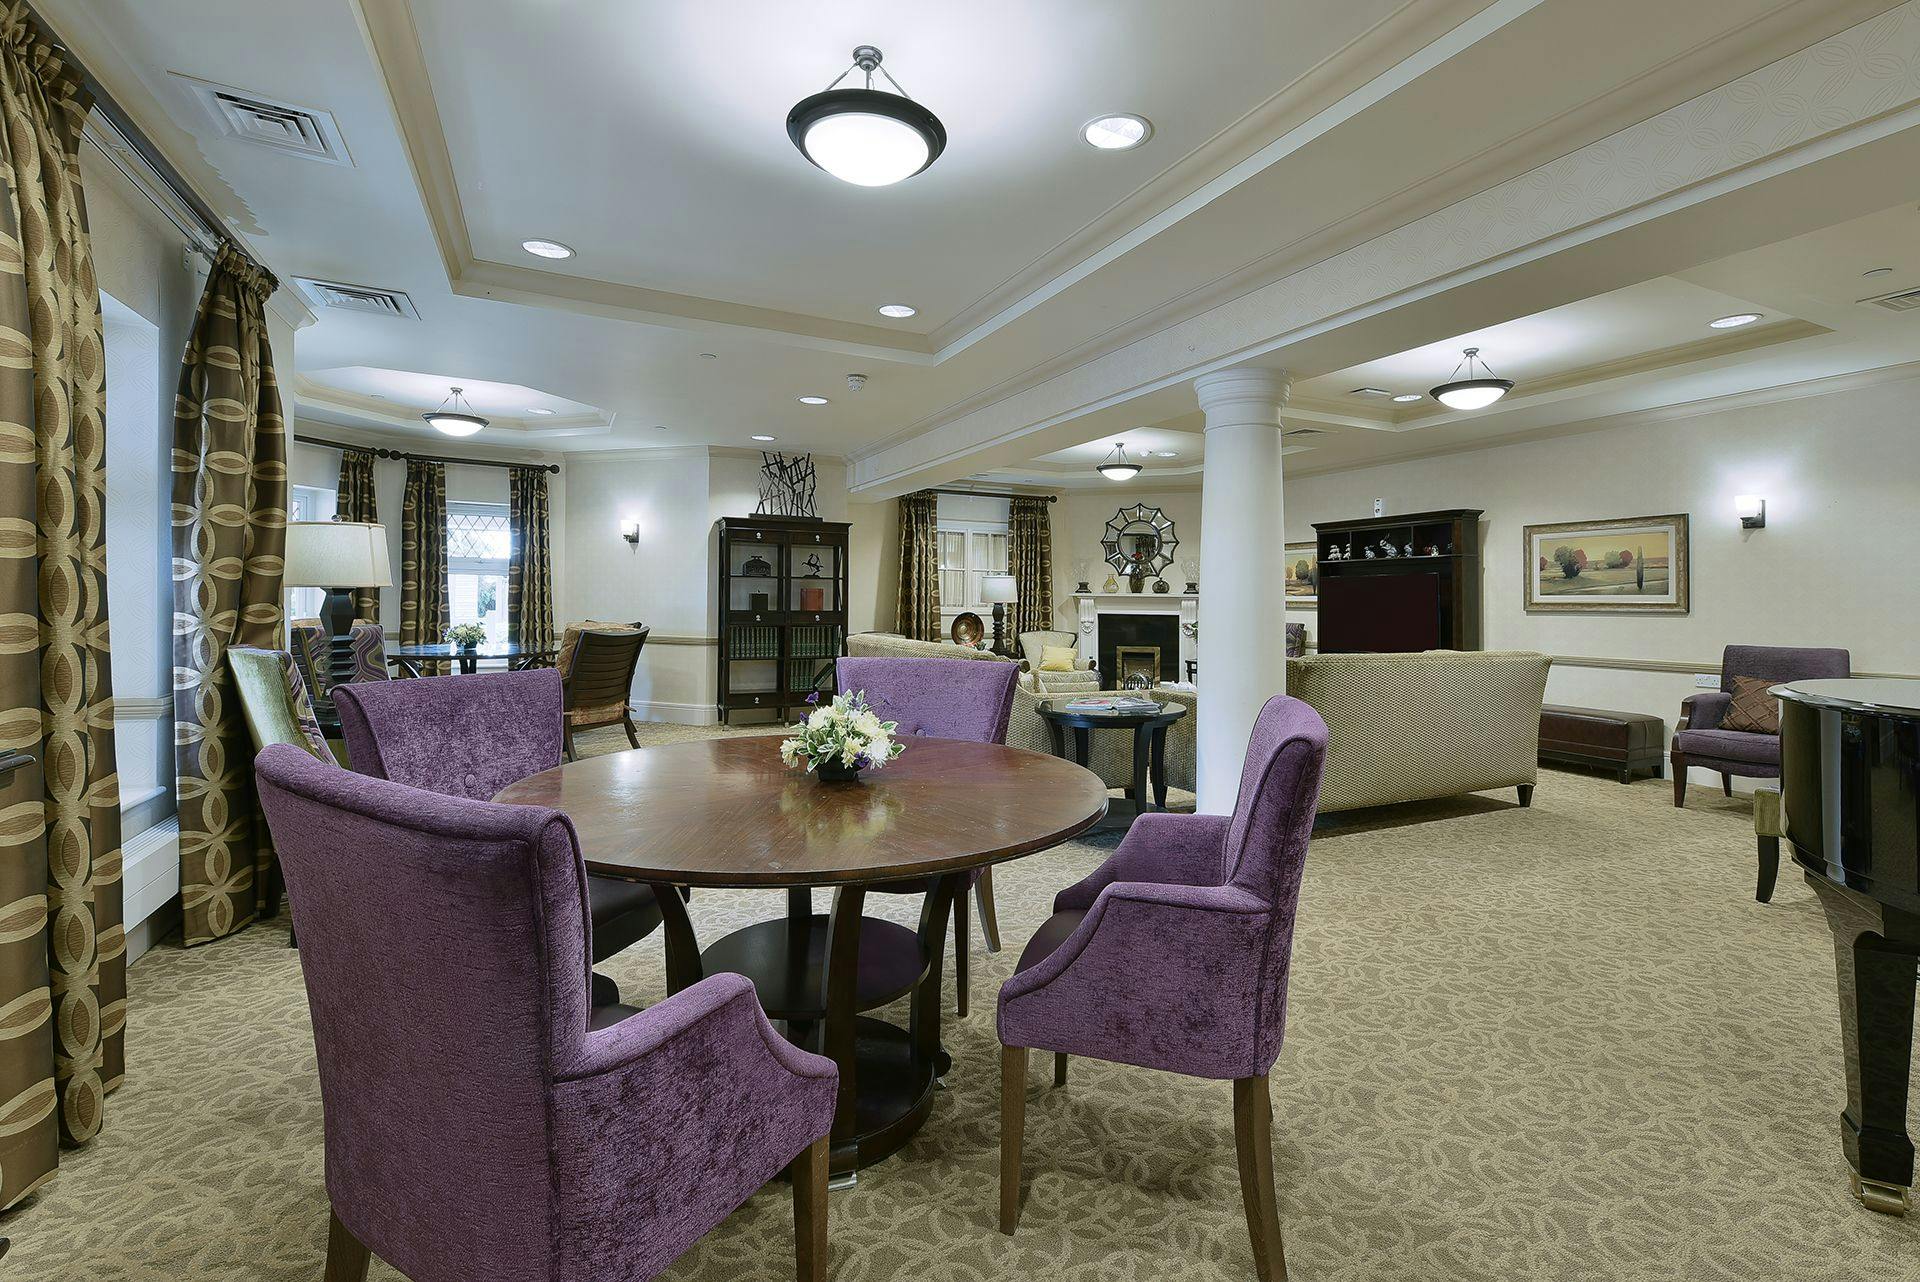 Dining area at Sonning Gardens care home in Sonning, Berkshire